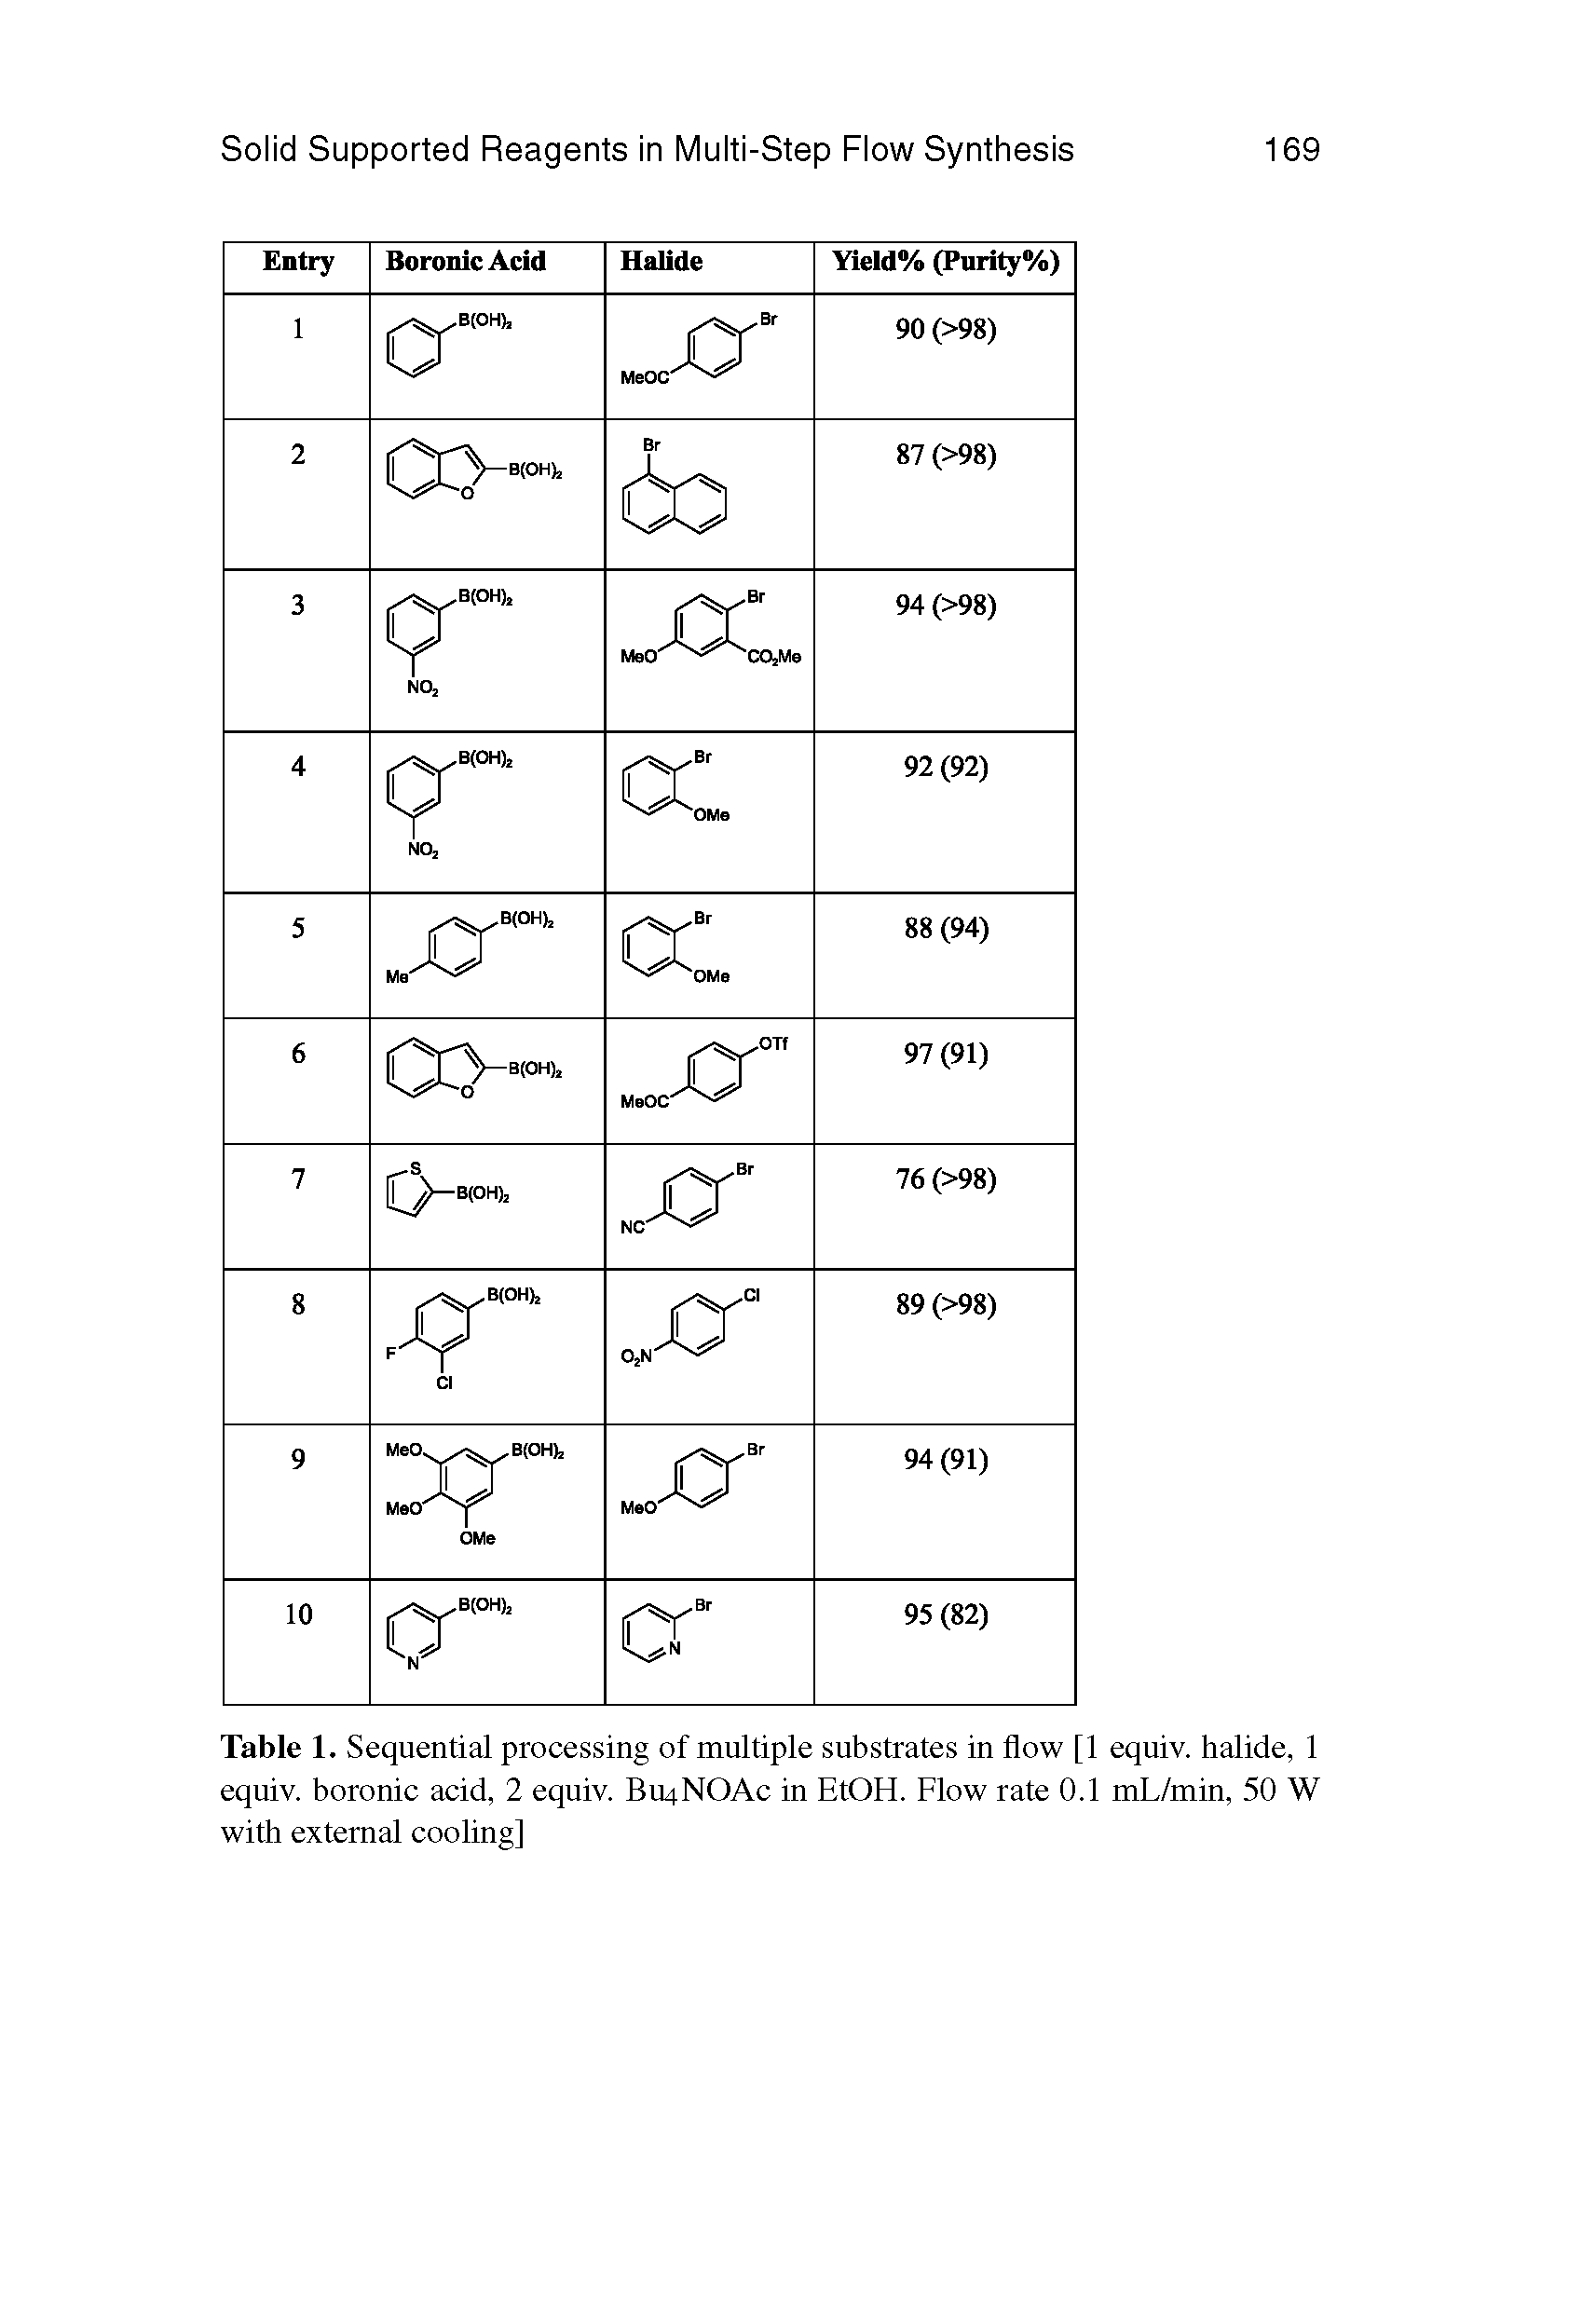 Table 1. Sequential processing of multiple substrates in flow [1 equiv. halide, 1 equiv. boronic acid, 2 equiv. BrqNOAc in EtOH. Flow rate 0.1 mL/min, 50 W with external cooling]...